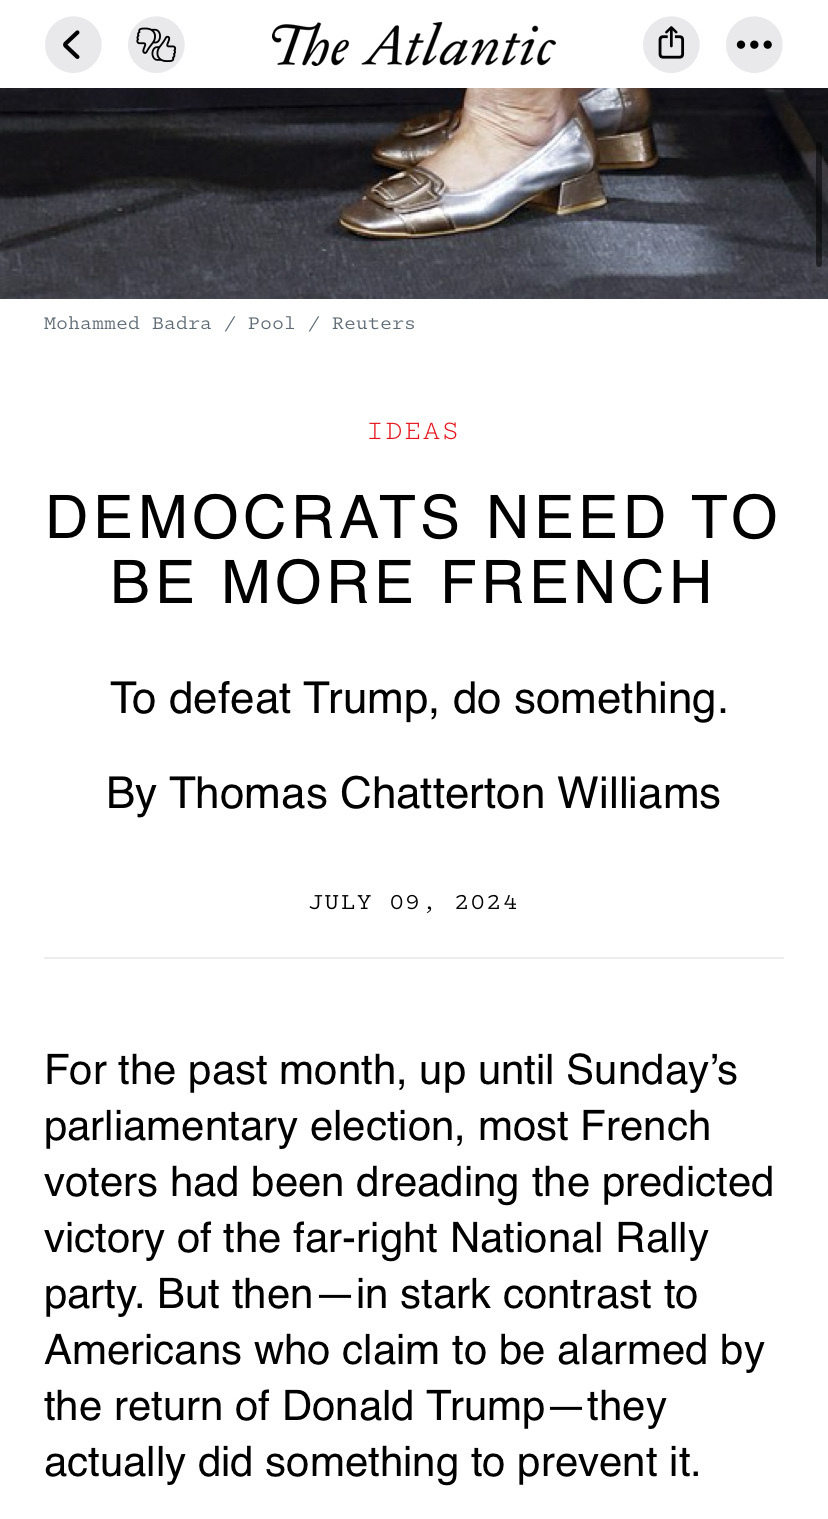 Screenshot of an article from The Atlantic: “Democrats need to be more French” by Thomas Chatterton Williams